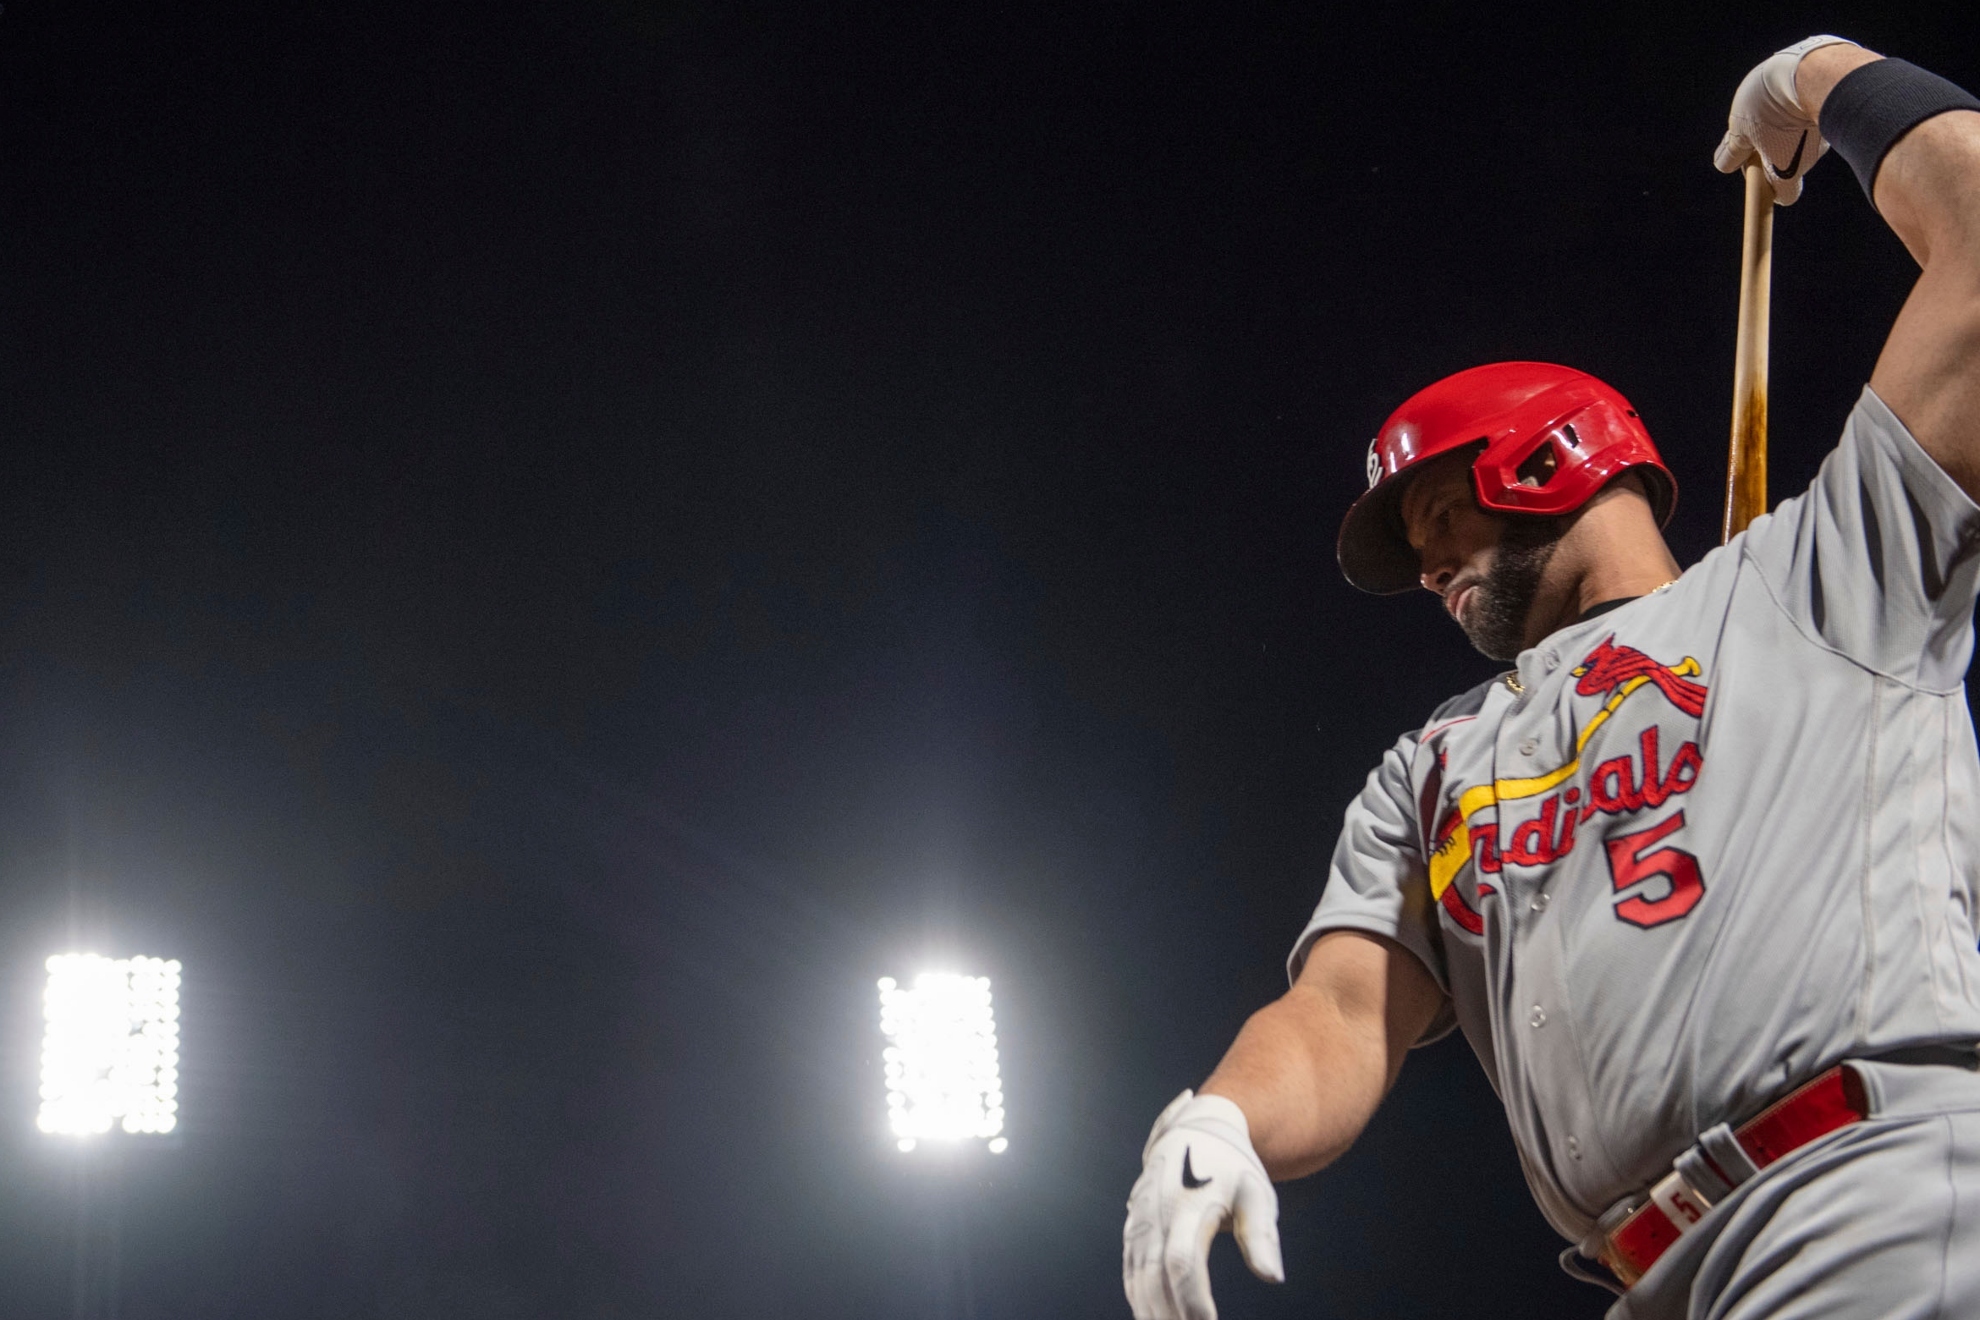 The Cardinals Albert Pujols warms up before stepping up to the plate on Monday, Oct. 3, 2022, at a baseball game against the Pittsburgh Pirates in Pittsburgh. / AP